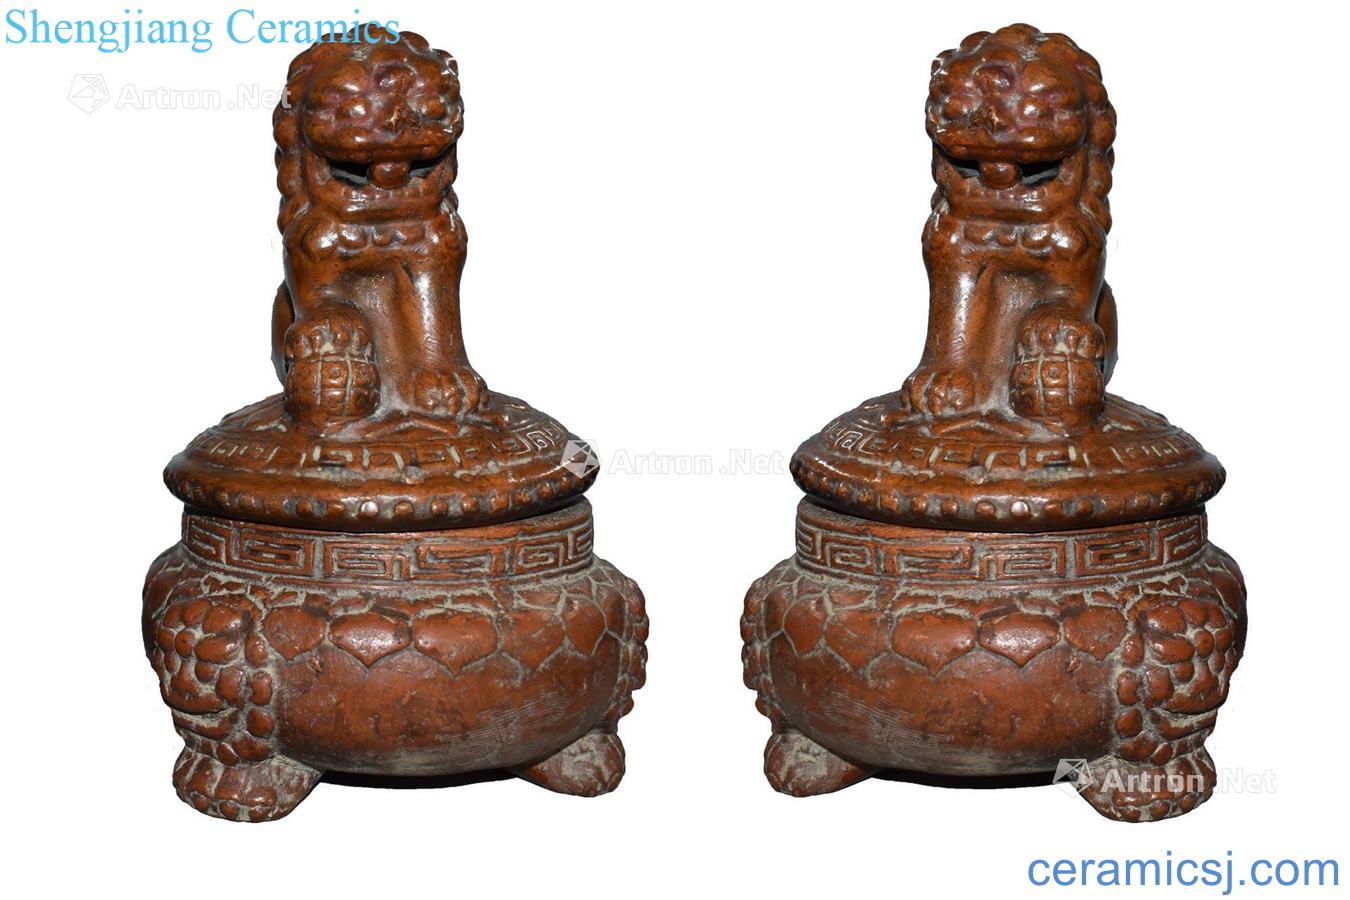 In the Ming dynasty cover ceramic incense burner a lion